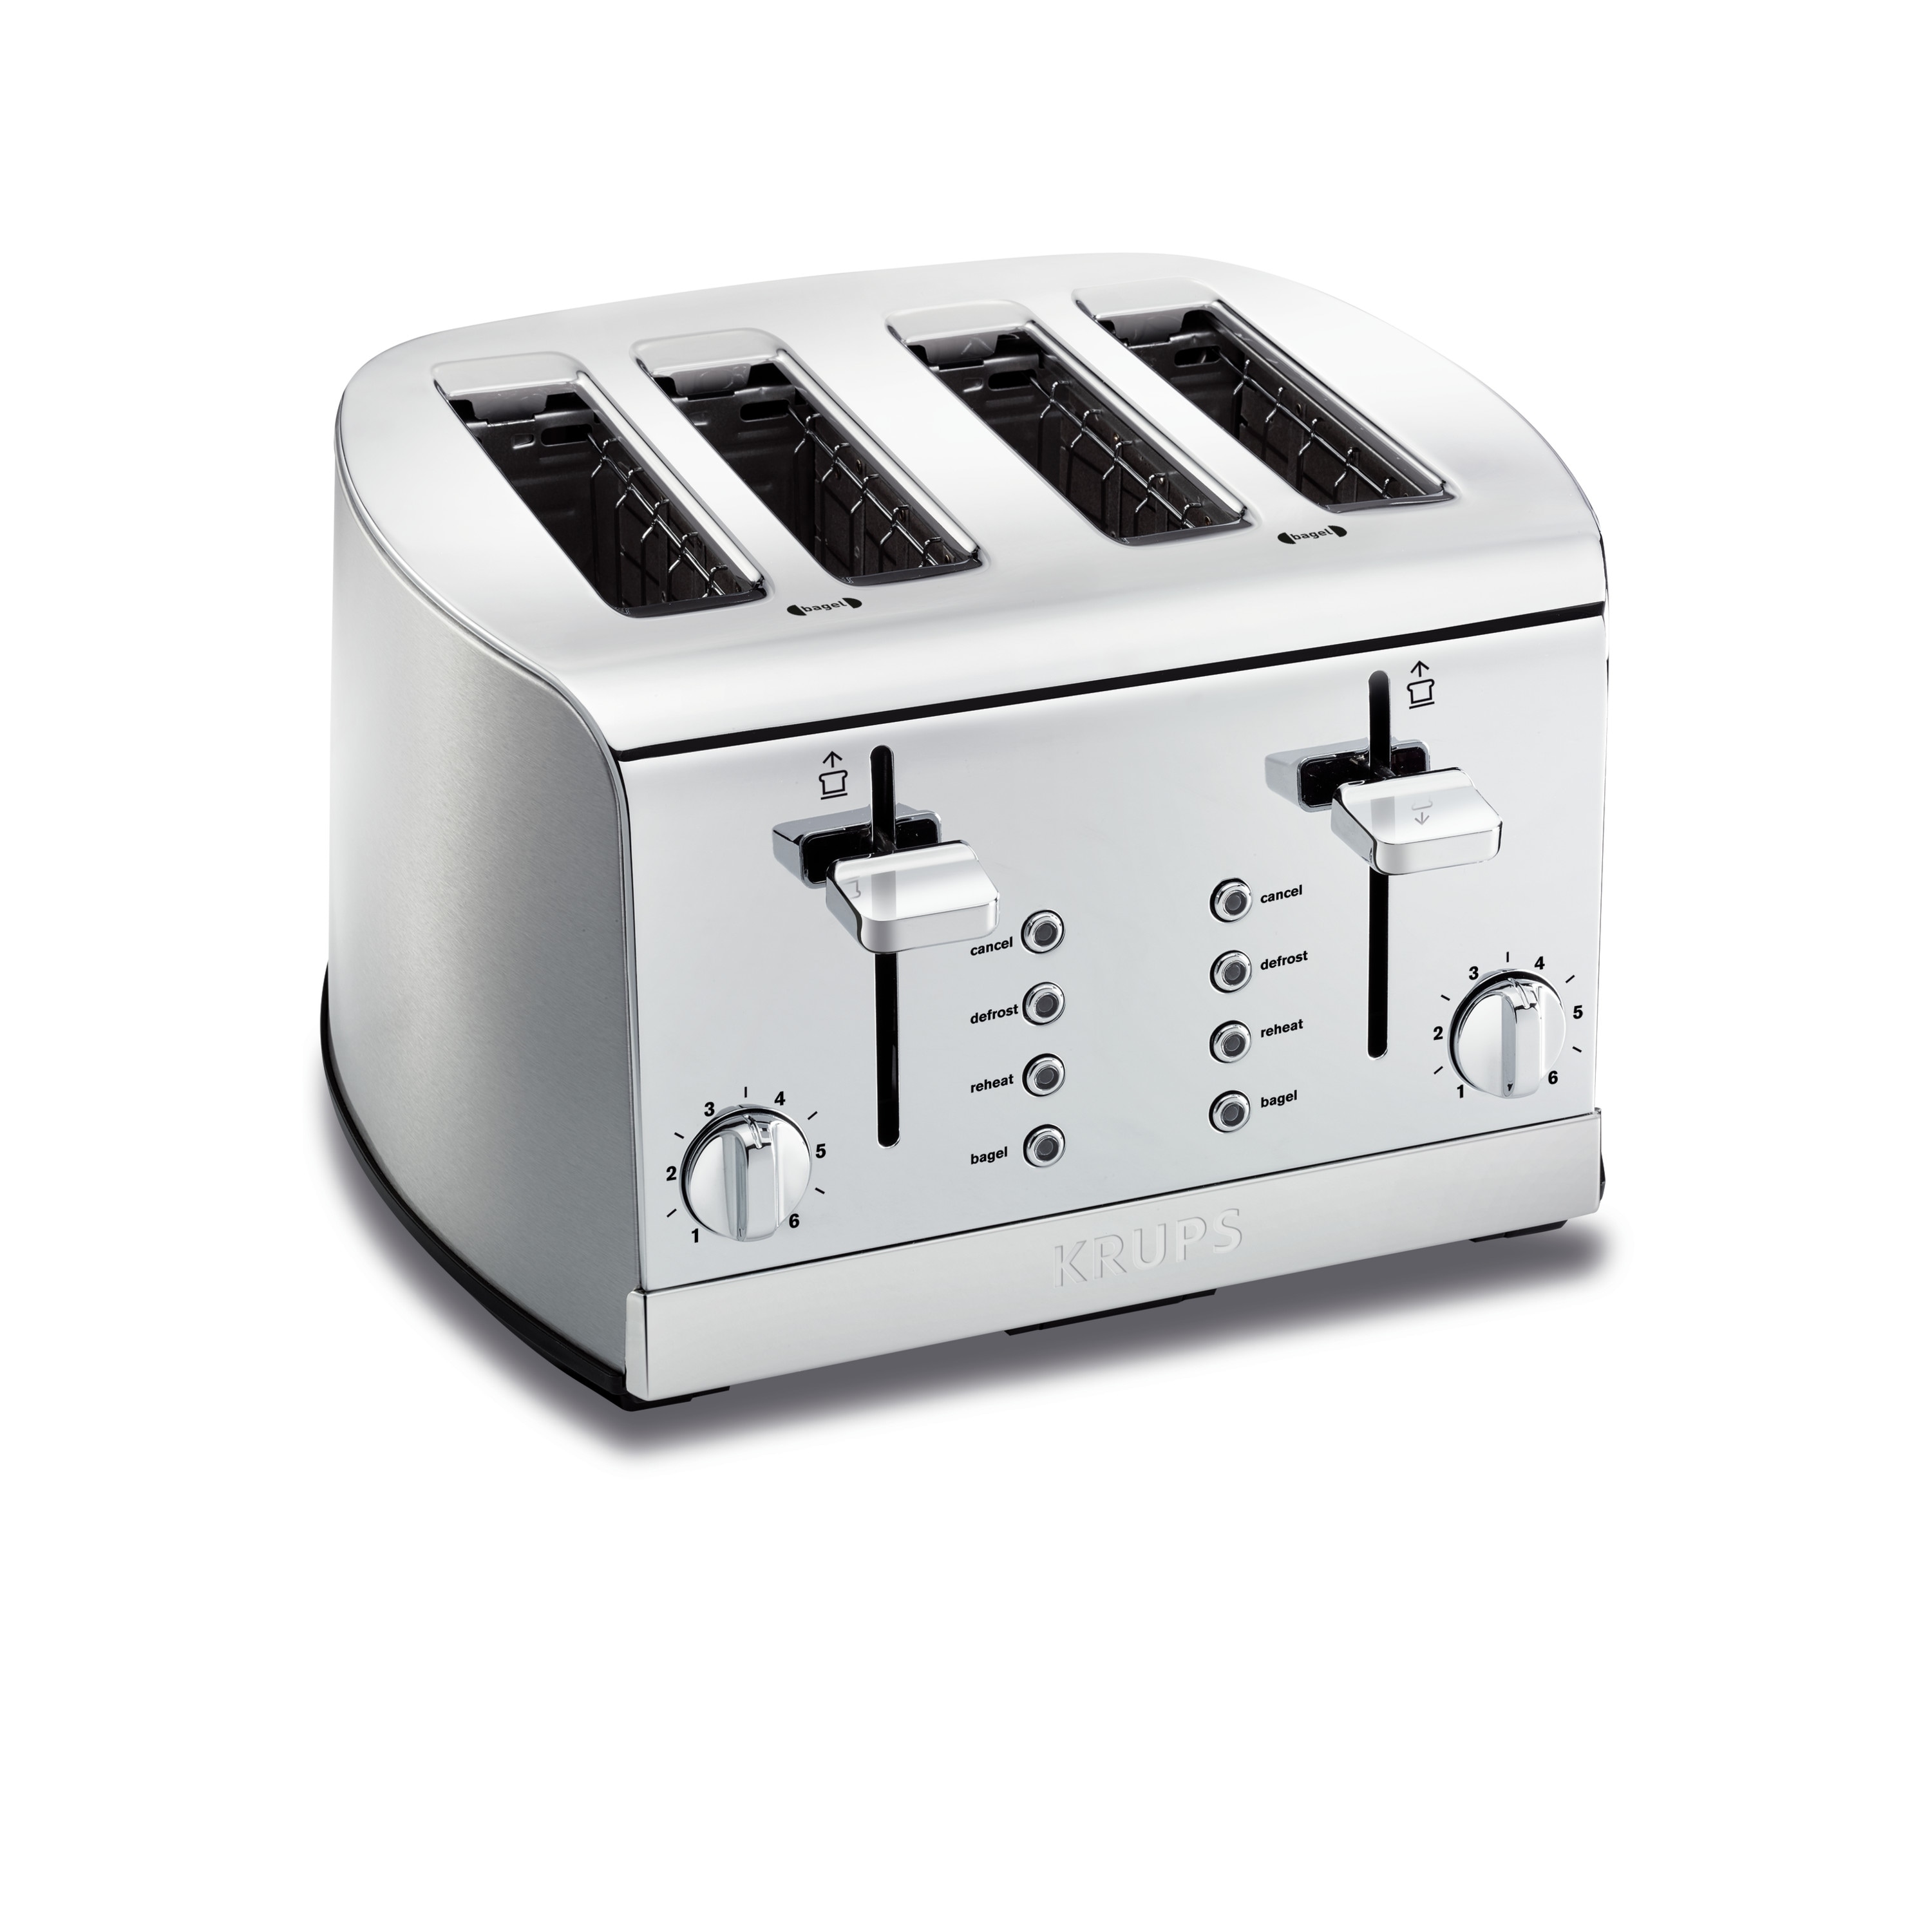 https://ak1.ostkcdn.com/images/products/is/images/direct/16397aa467fef007fed7d83ddbdff518c2e8b388/KRUPS-KH734D51-4-Slice-Toaster.jpg